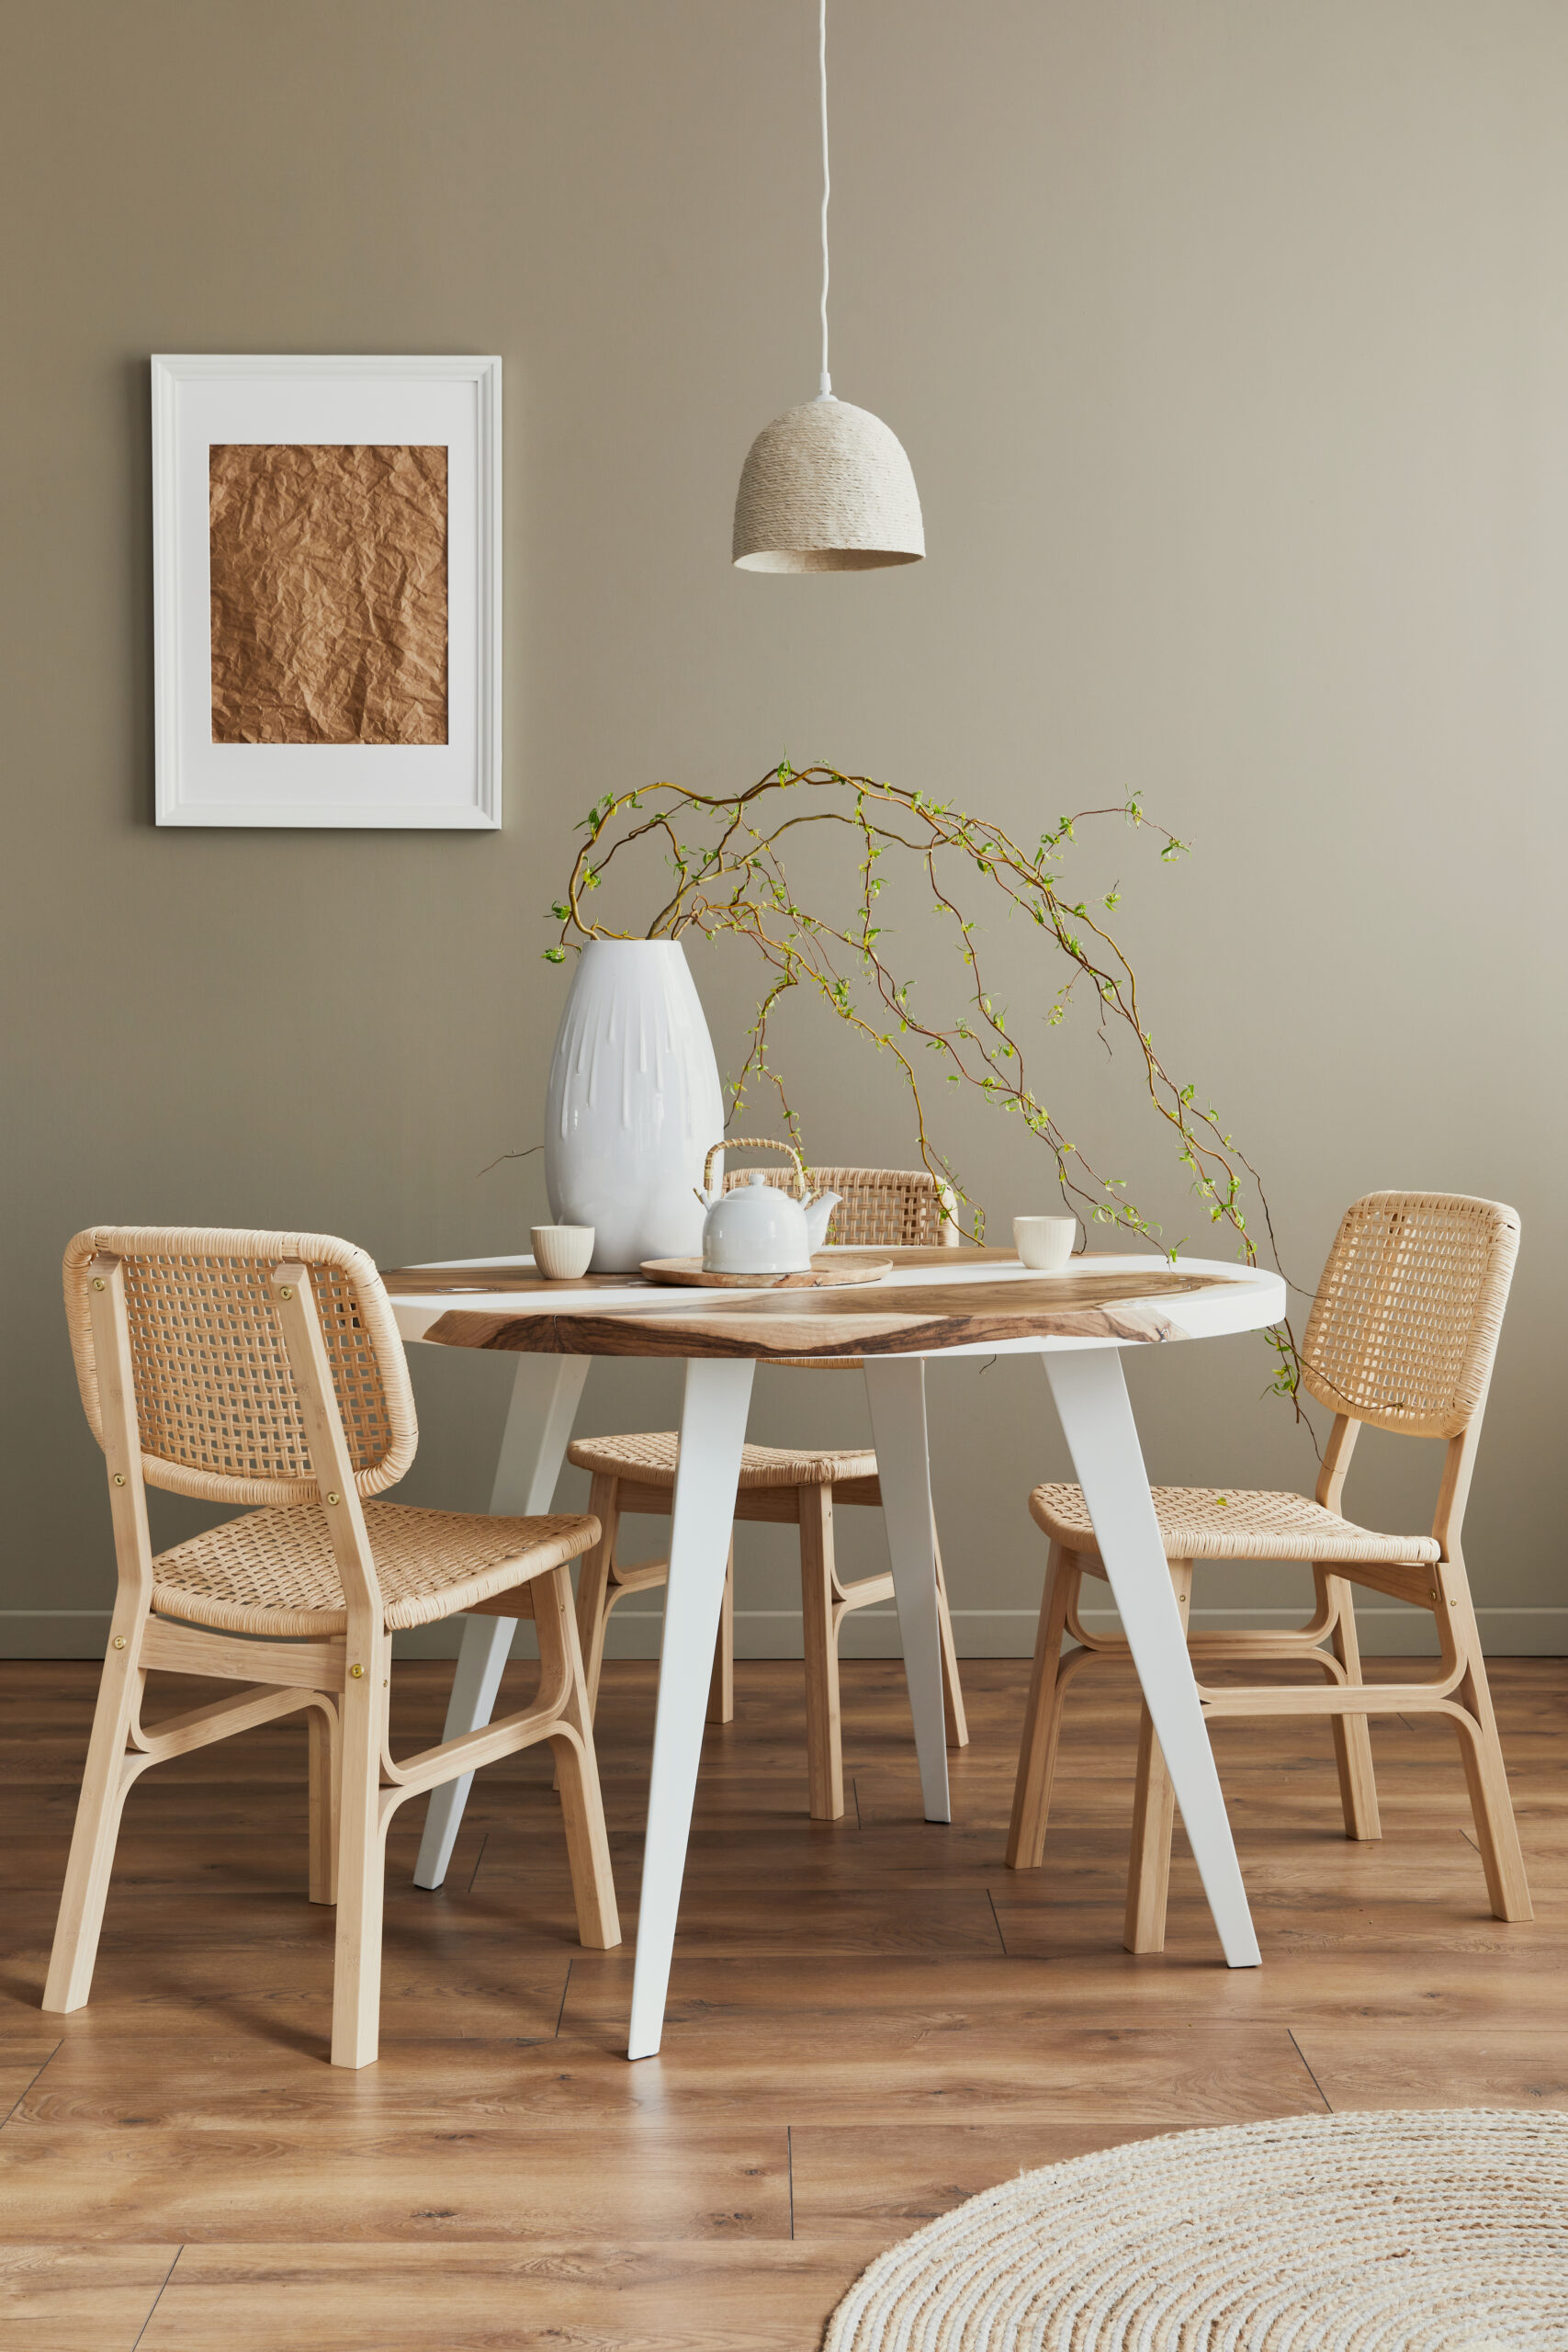 Stylish interior of dining room at cozy home with white mock up poster frame, design chairs, family table, teapot, cups, decoration and elegant personal accessories in modern home decor. Template.